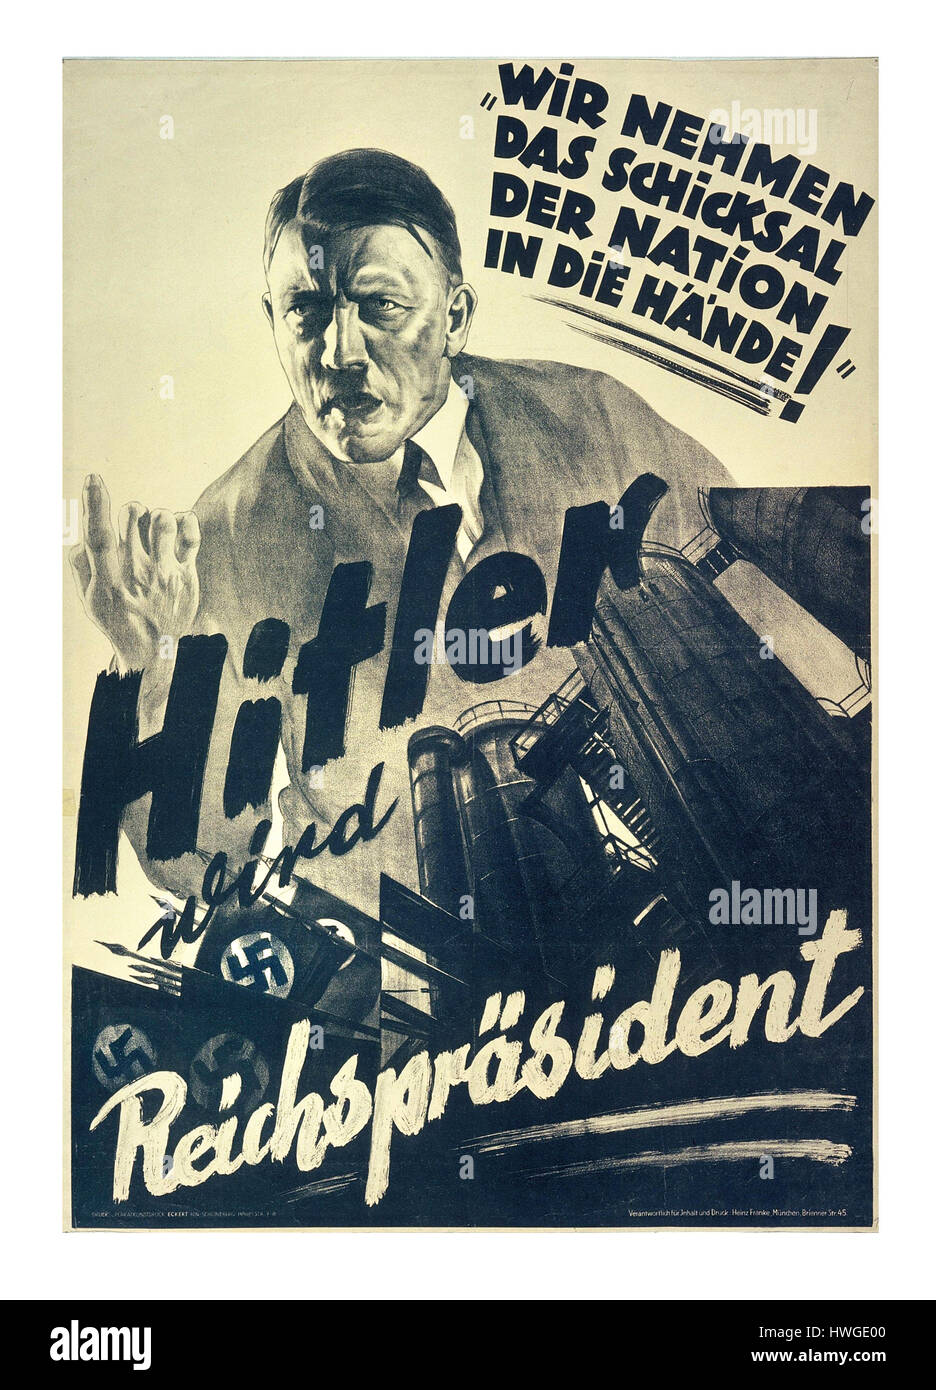 ADOLF HITLER NSDAP Pre-war election 1930's German Propaganda Poster with Adolf Hitler as 'Reichsprasident' stating 'we take the fate of the nation in our hand' Stock Photo